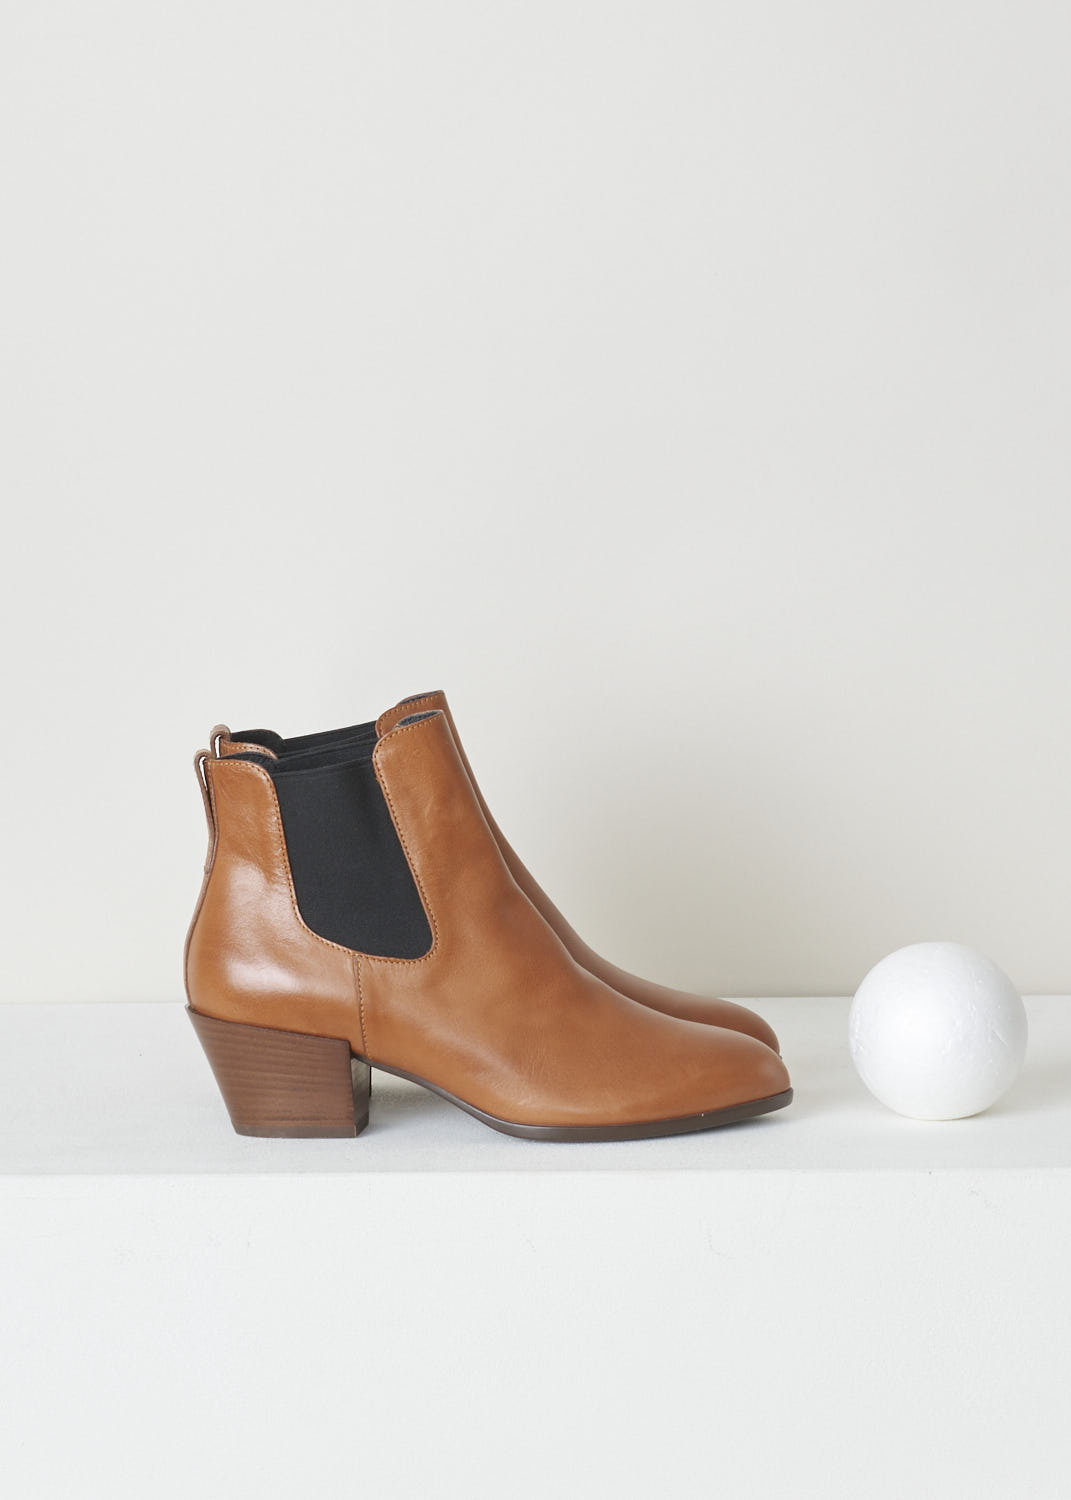 HOGAN, COGNAC CHELSEA BOOTS, HXW4740W890LEHS003, Brown, Side, Cognac colored Chelsea boots featuring a contrasting black elastic side panel and a pull tab on the back of the boot. These boots have a small heel and a pointed toe.  

Heel height: 5.5 cm / 2.1 inch
